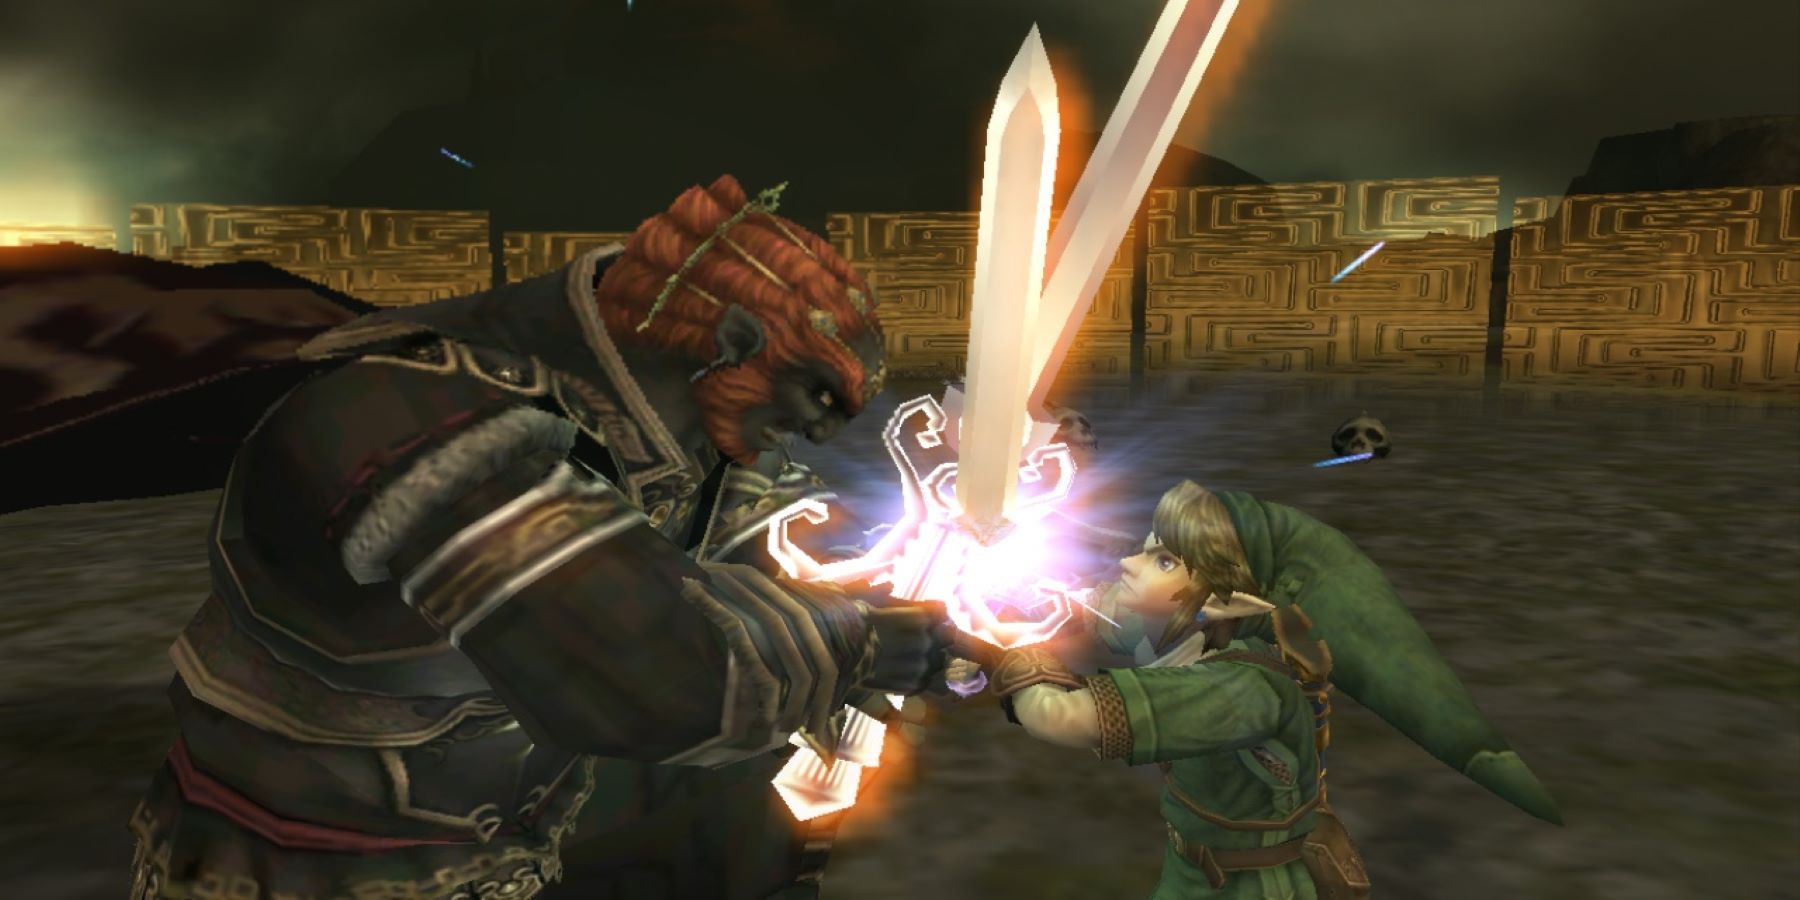 Link and Ganondorf clashing in Hyrule Field during the final boss battle of The Legend of Zelda: Twilight Princess